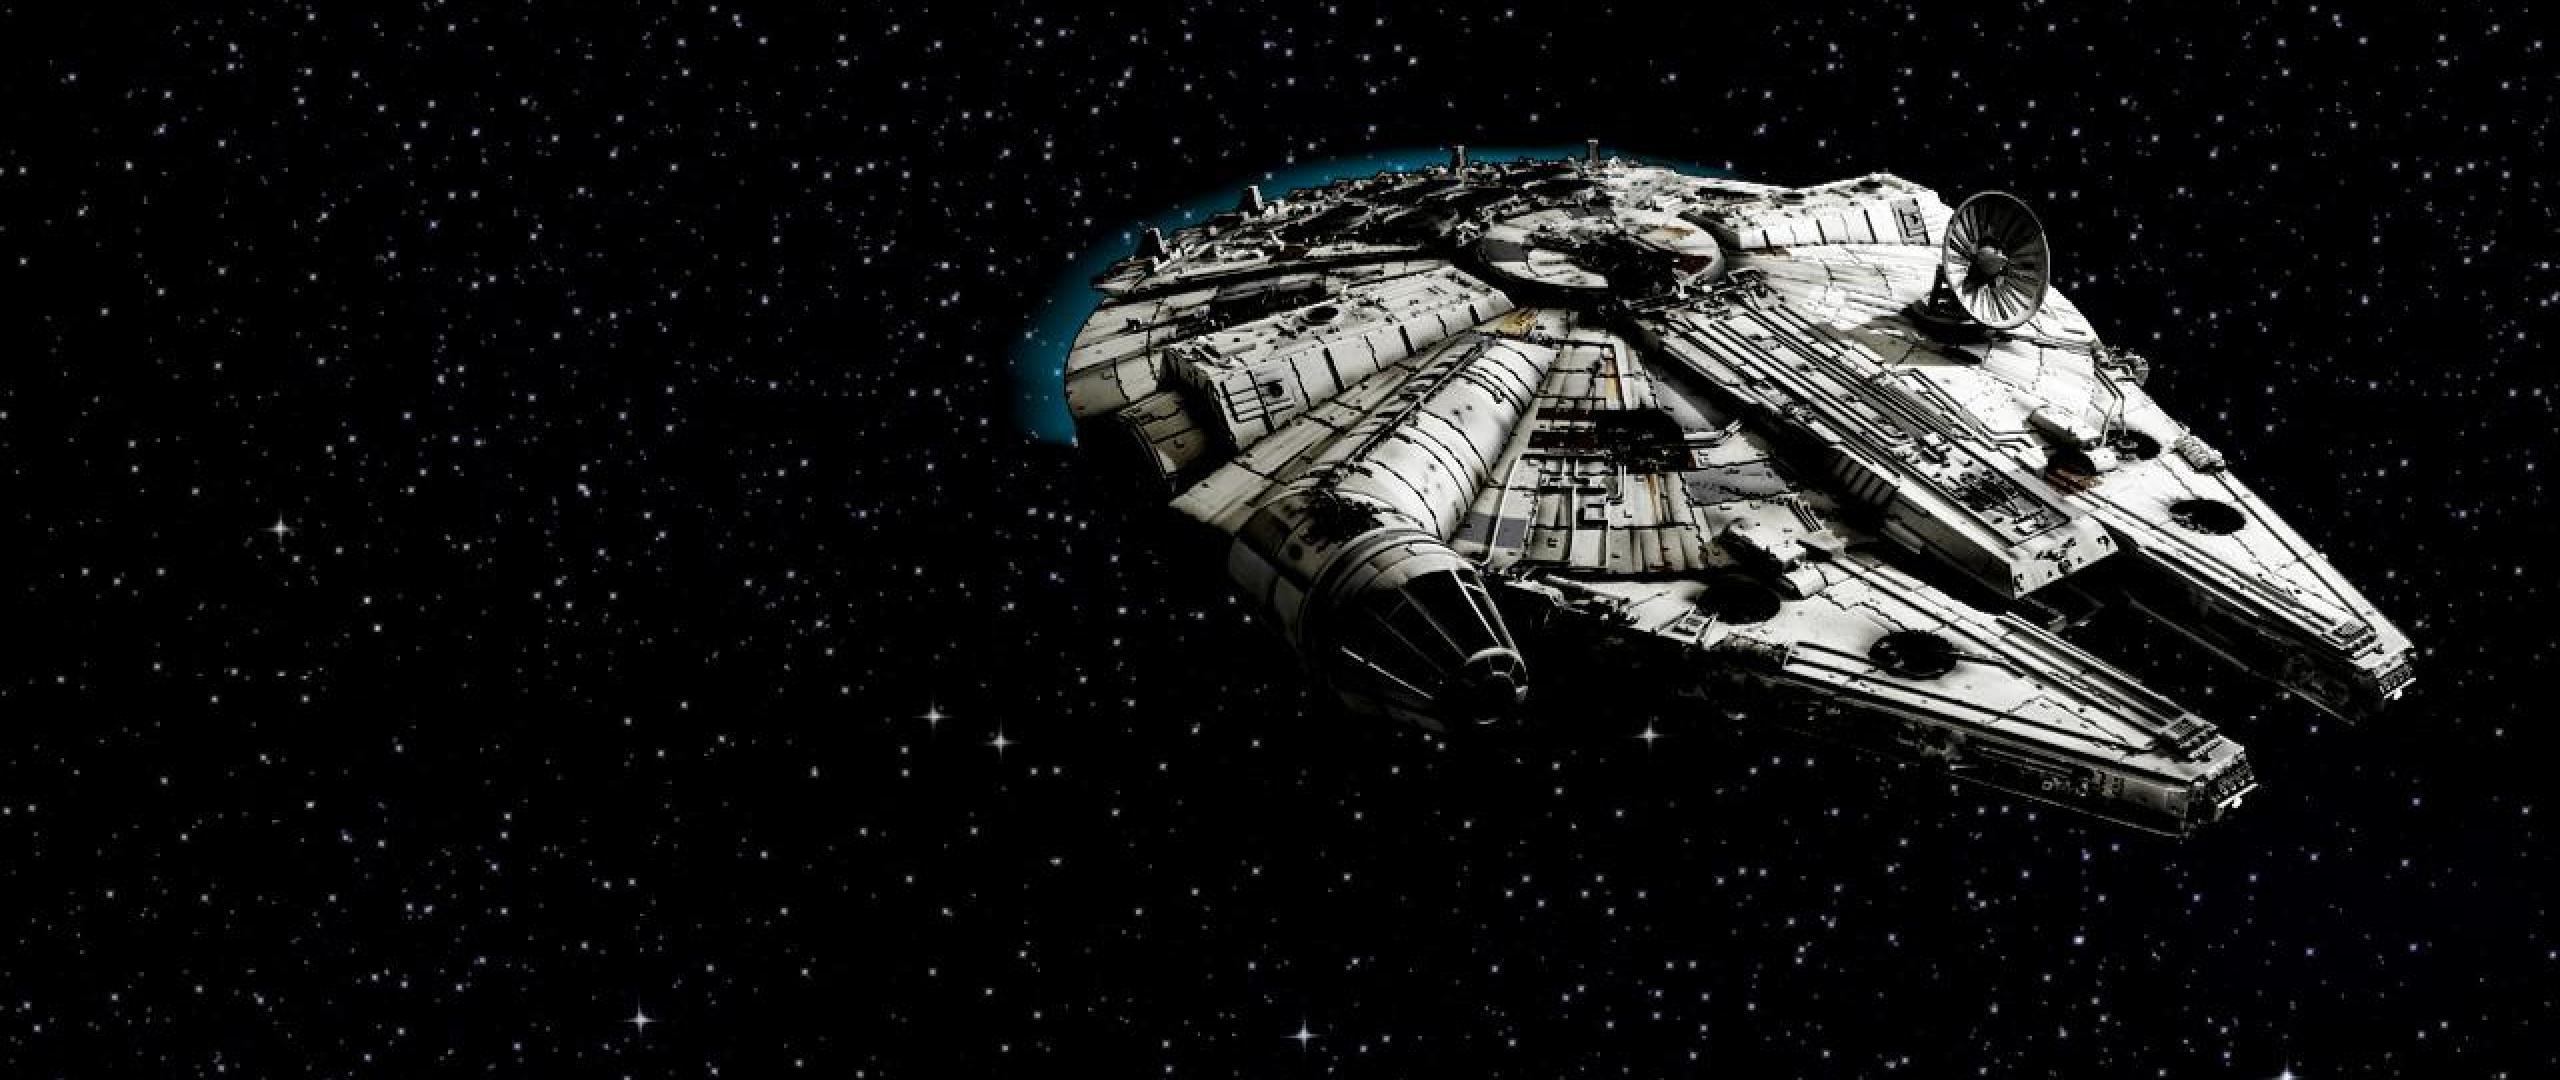 Millennium Falcon Hd Wallpapers Top Free Millennium Falcon Hd Backgrounds Wallpaperaccess